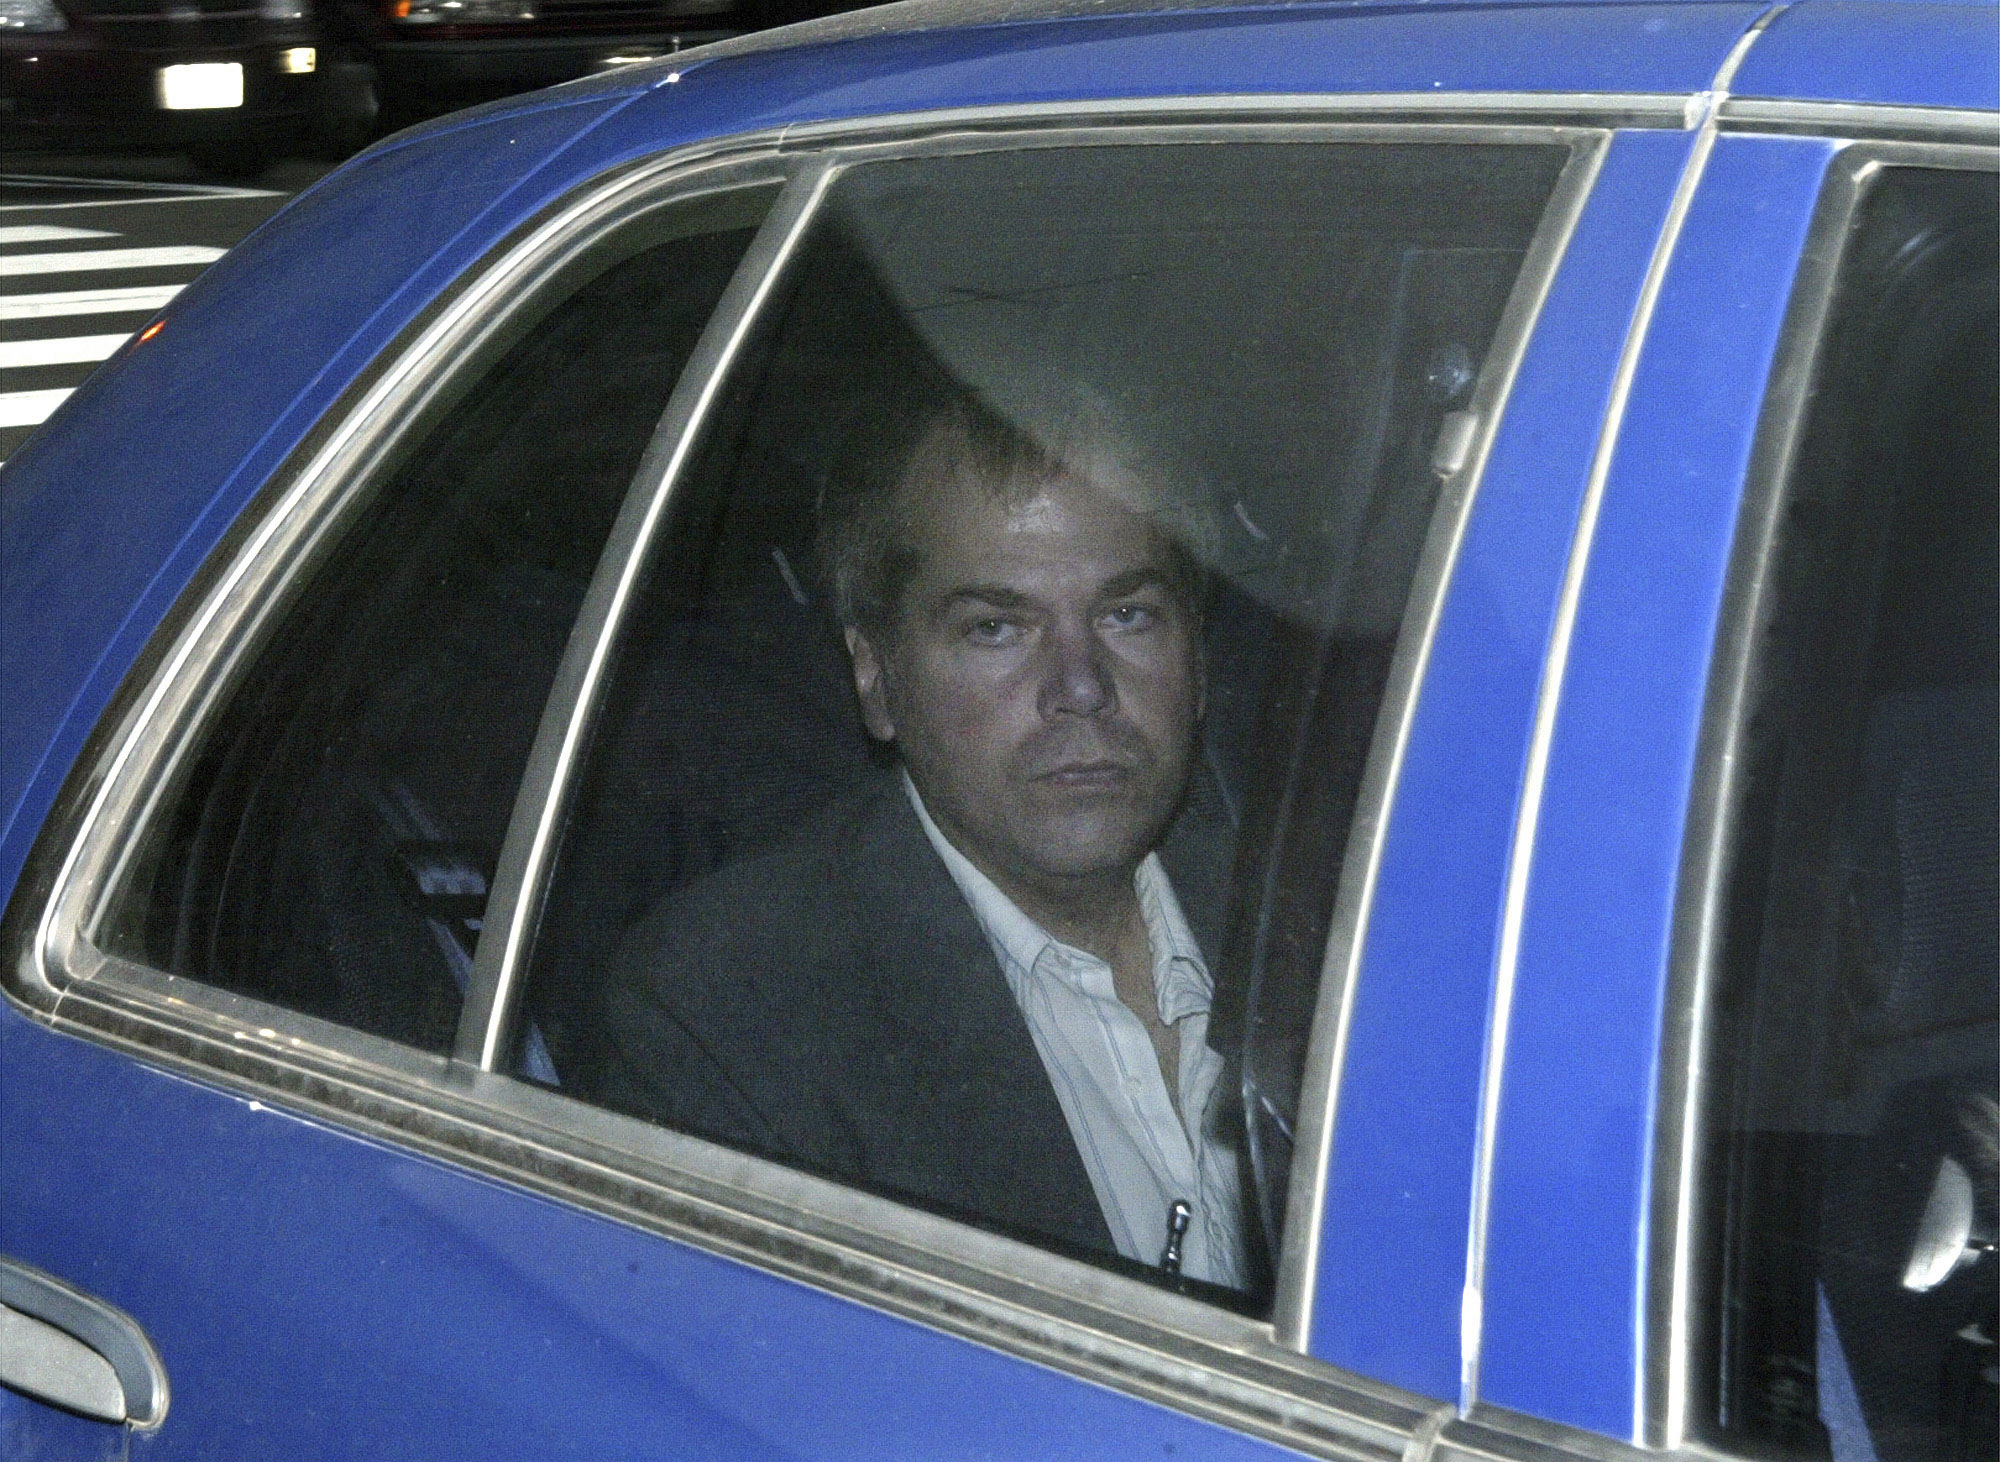 FILE - In this Nov. 18, 2003, file photo, John Hinckley Jr. arrives at U.S. District Court in Washington. A federal judge in Washington is holding what is expected to be the final hearing for would-be Reagan assassin John Hinckley before he is released from restrictive conditions he has lived under since he shot the president in 1981. (AP Photo/Evan Vucci, File)